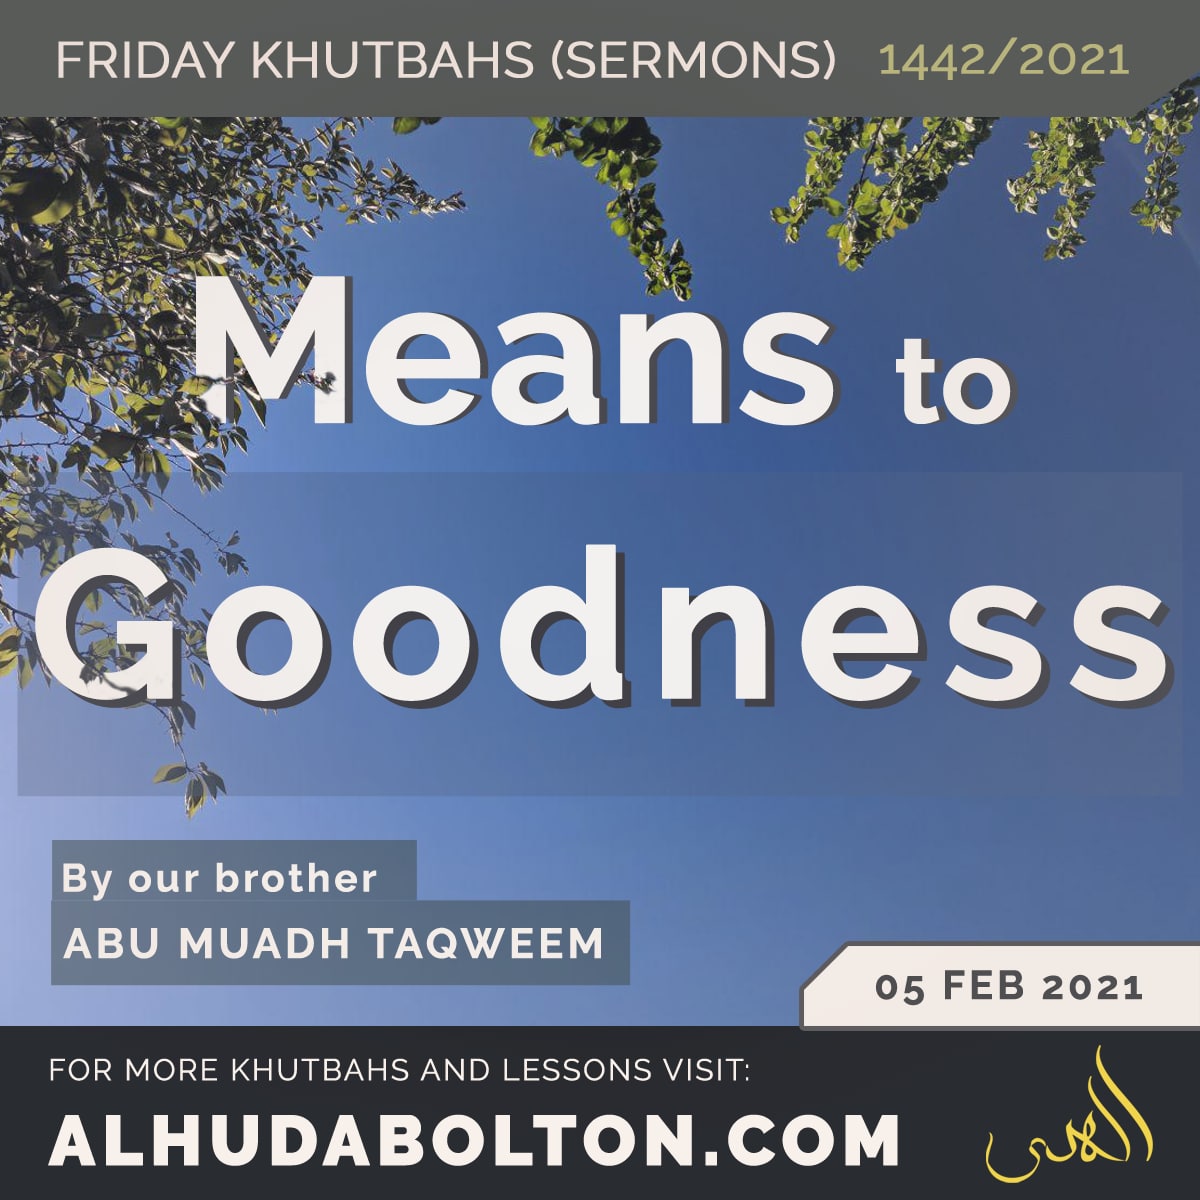 Khutbah: Means to Goodness